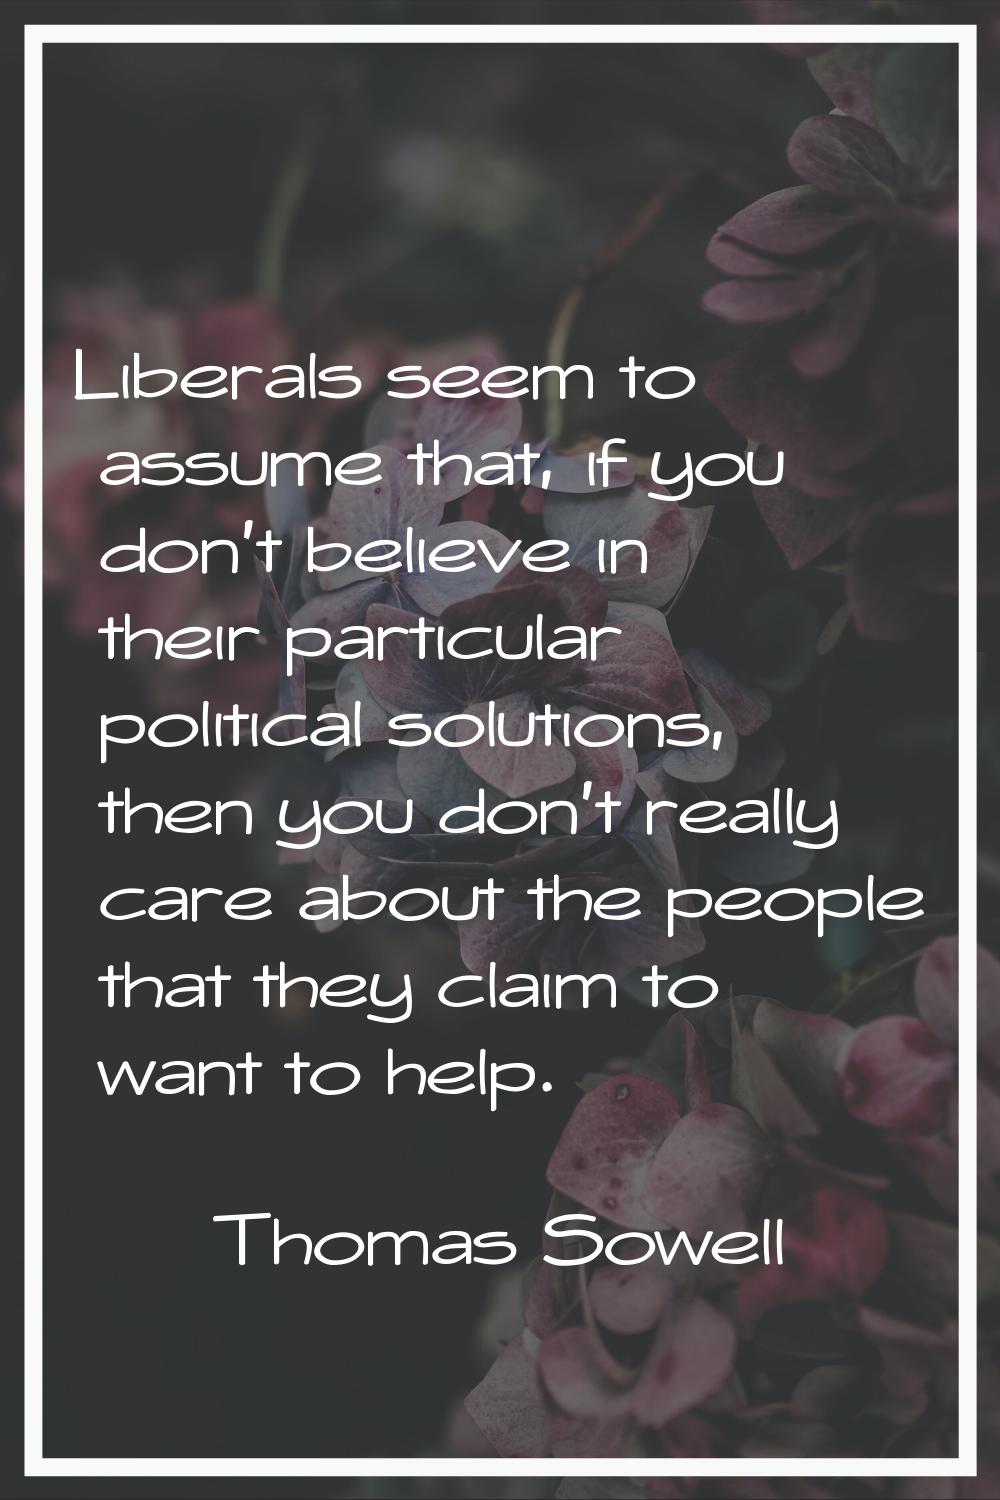 Liberals seem to assume that, if you don't believe in their particular political solutions, then yo